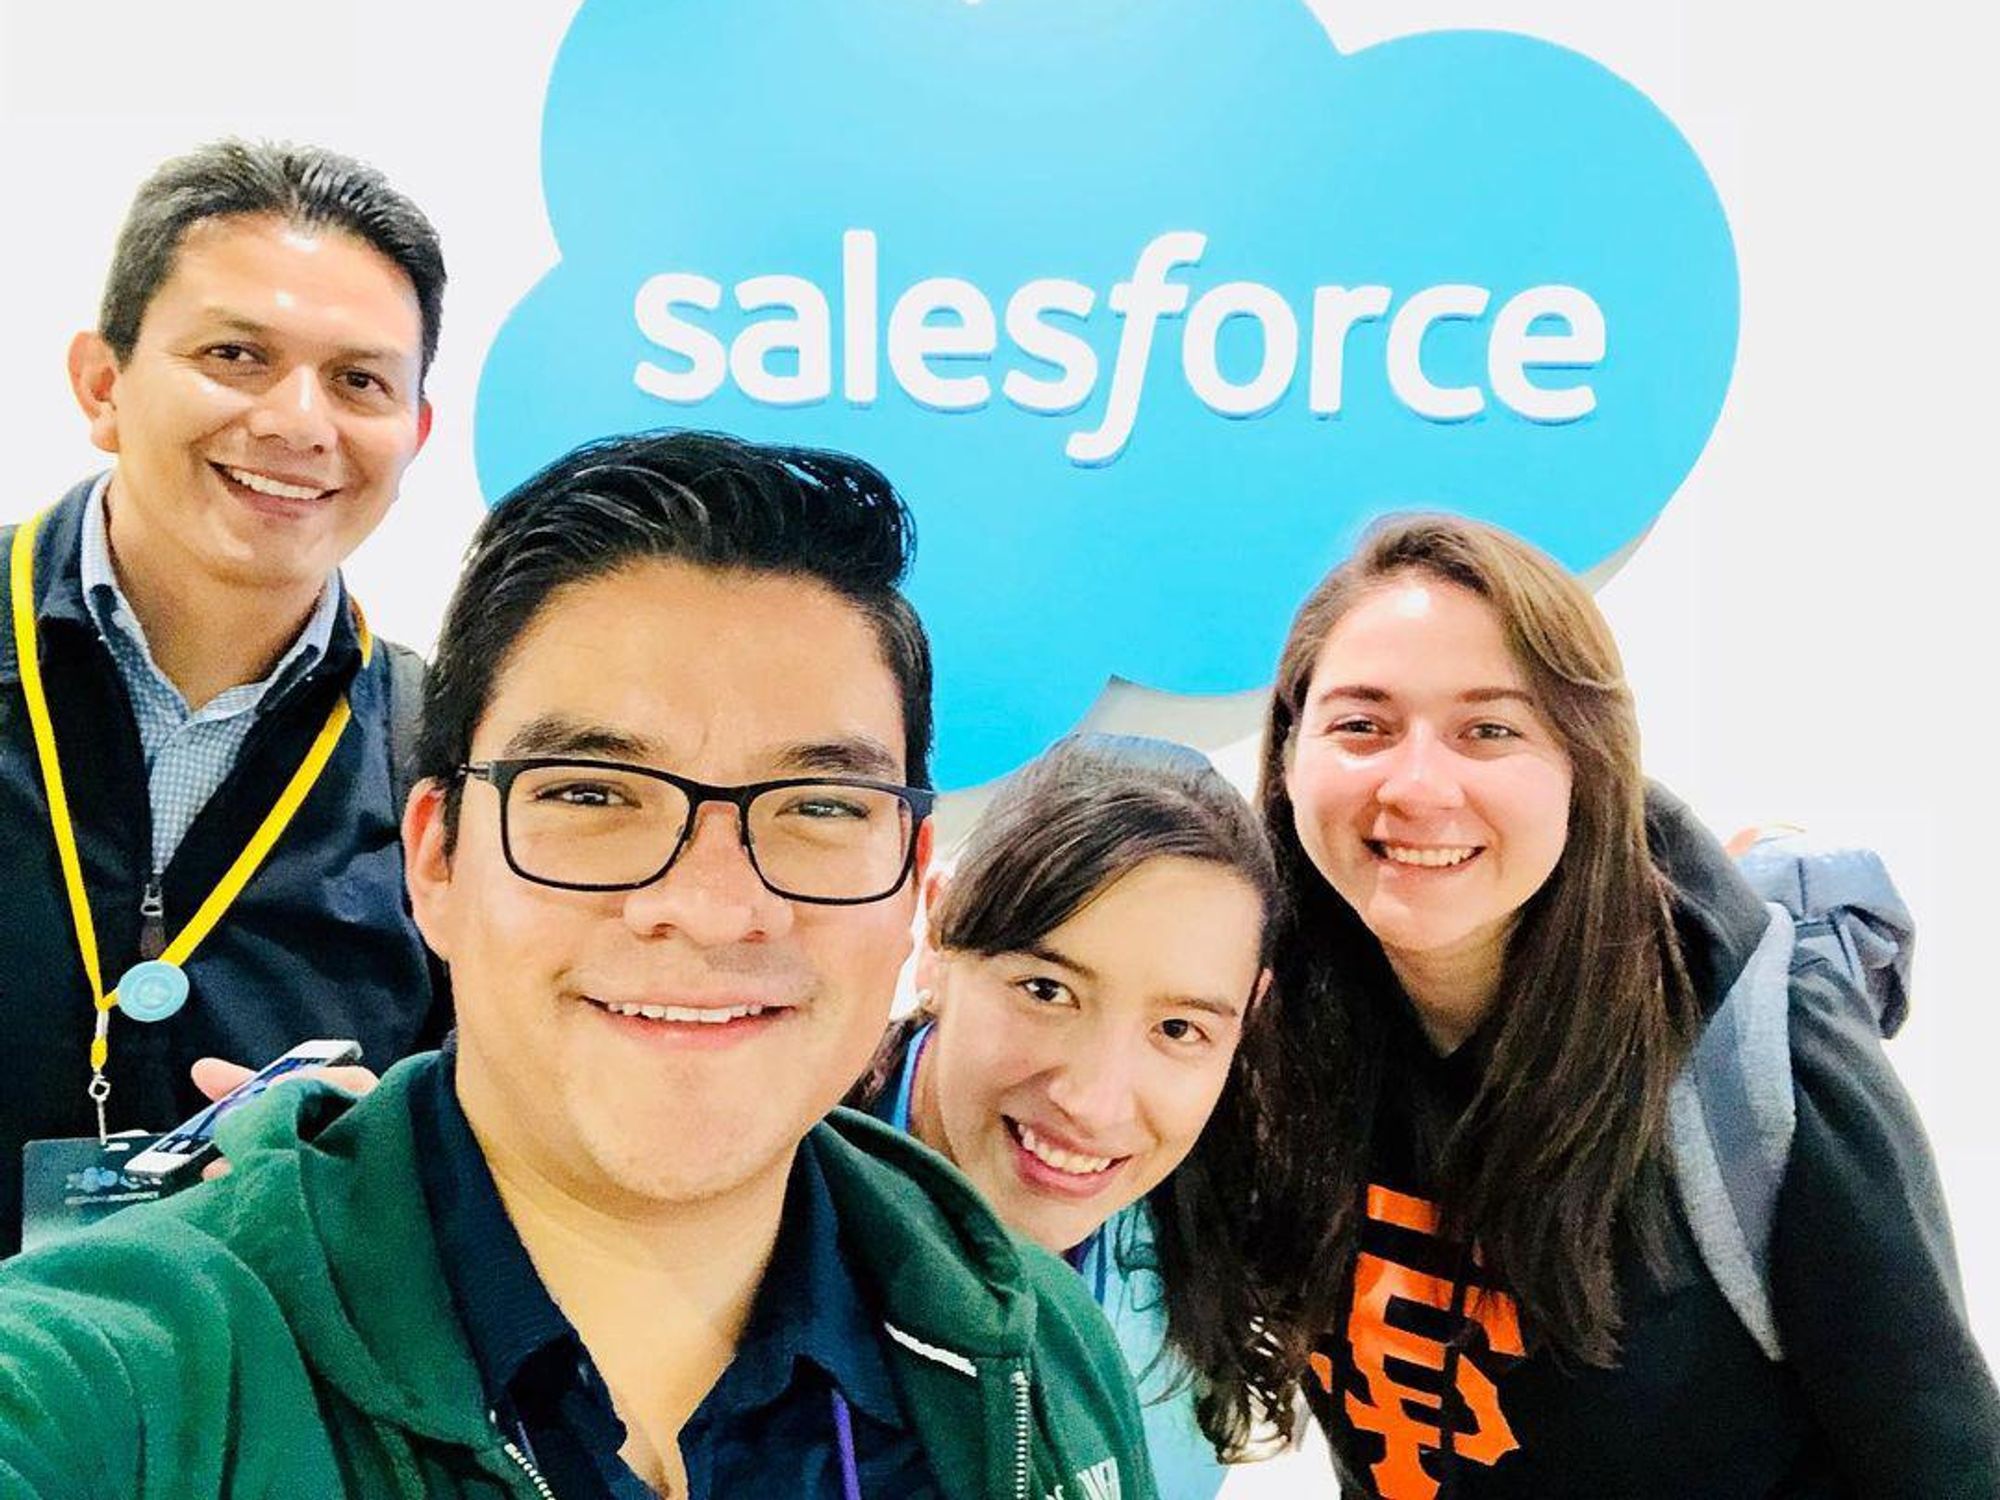 Salesforce employees at the company's headquarters.